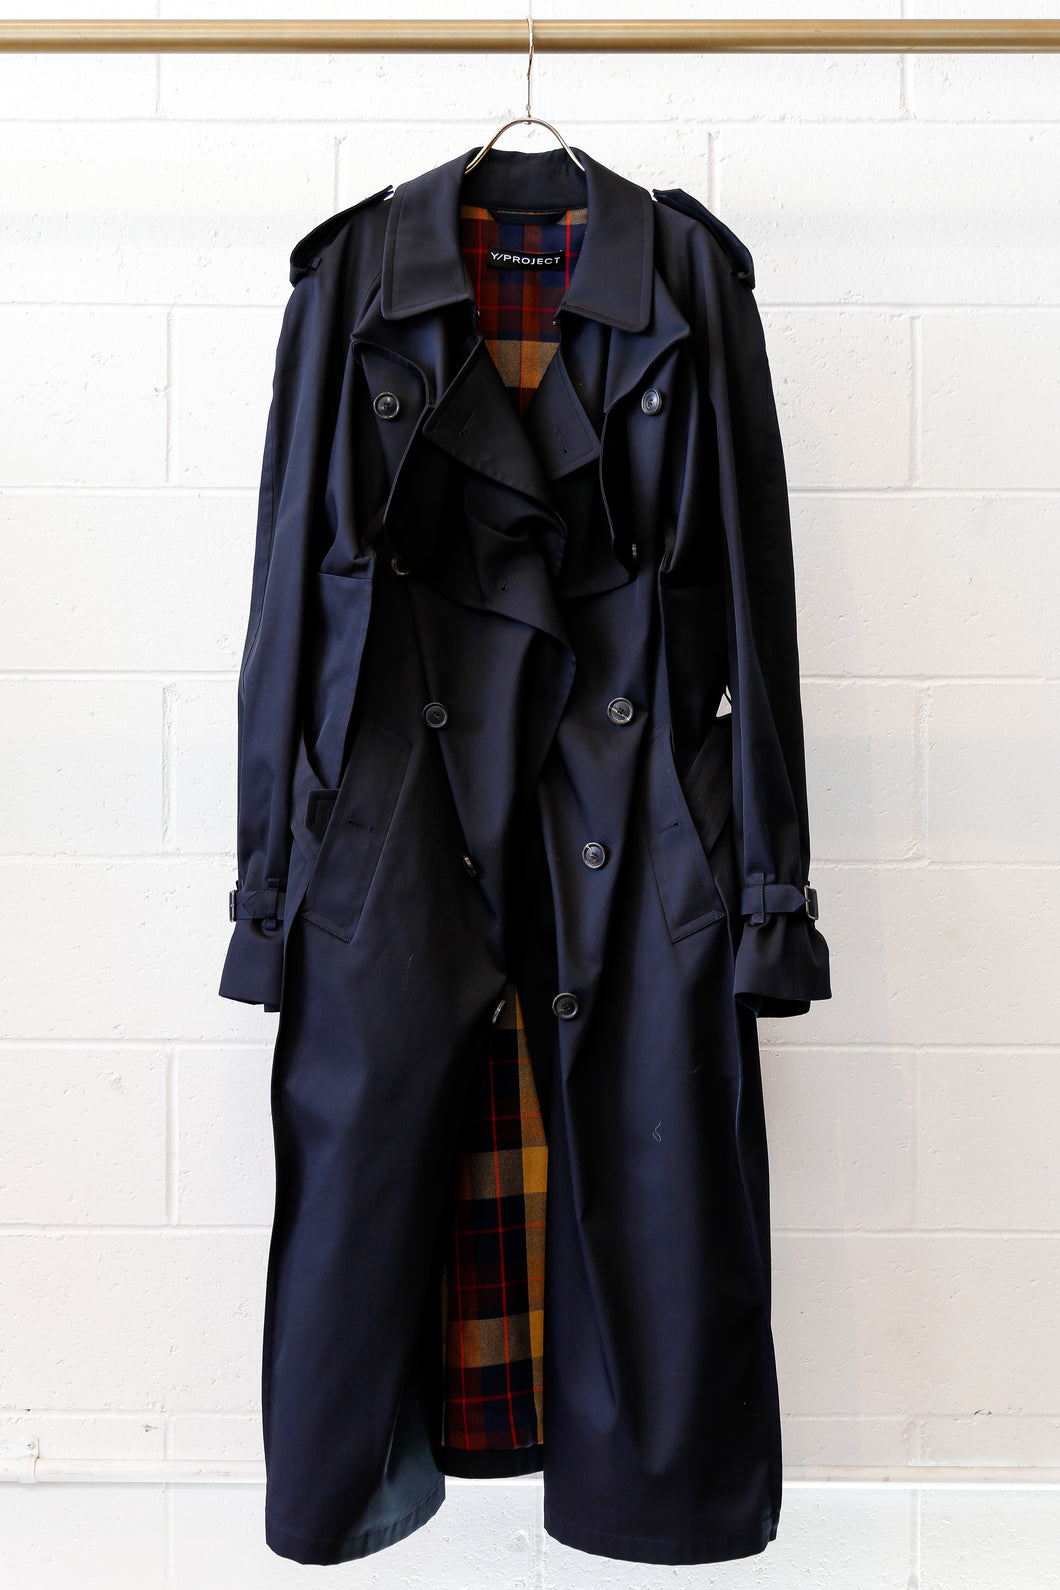 Y-Project Pop-Up Trench Coat - DN